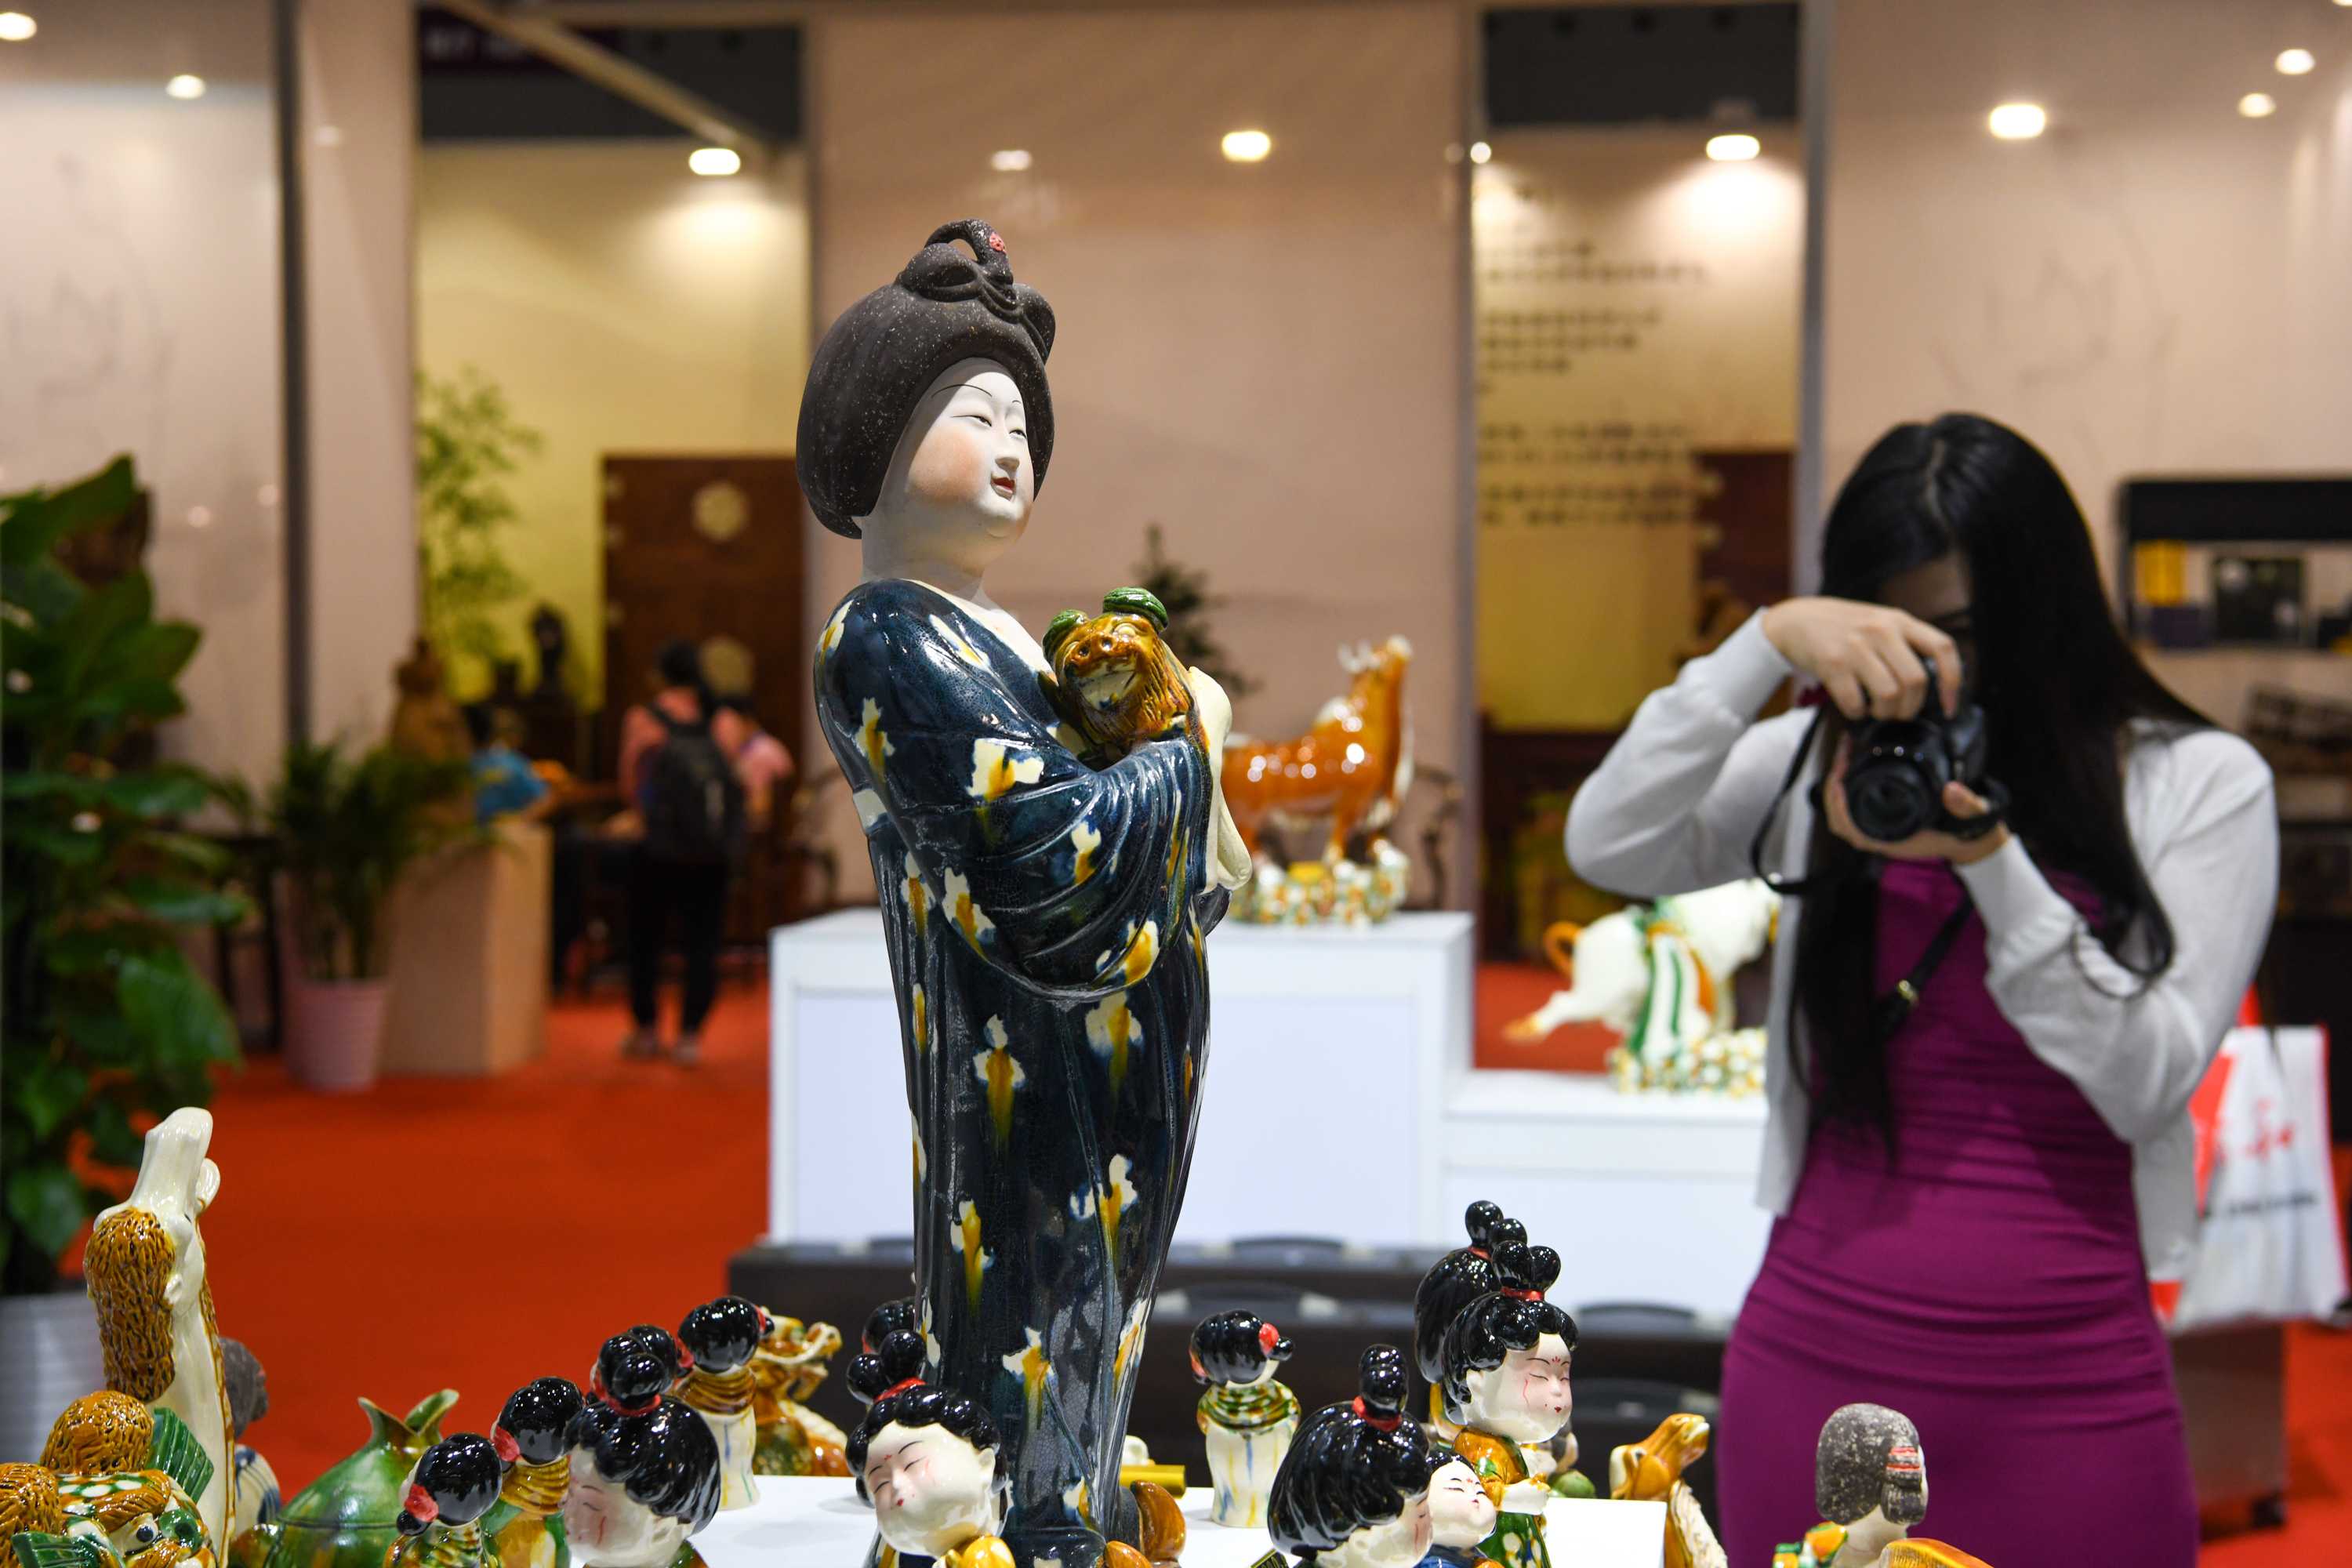 Blooming the Splendor of Cultural Confidence and Self Strengthening in the Era - A Frontline Observation of Nationalities | Culture | Self Strengthening from the "First Exhibition of Chinese Culture"